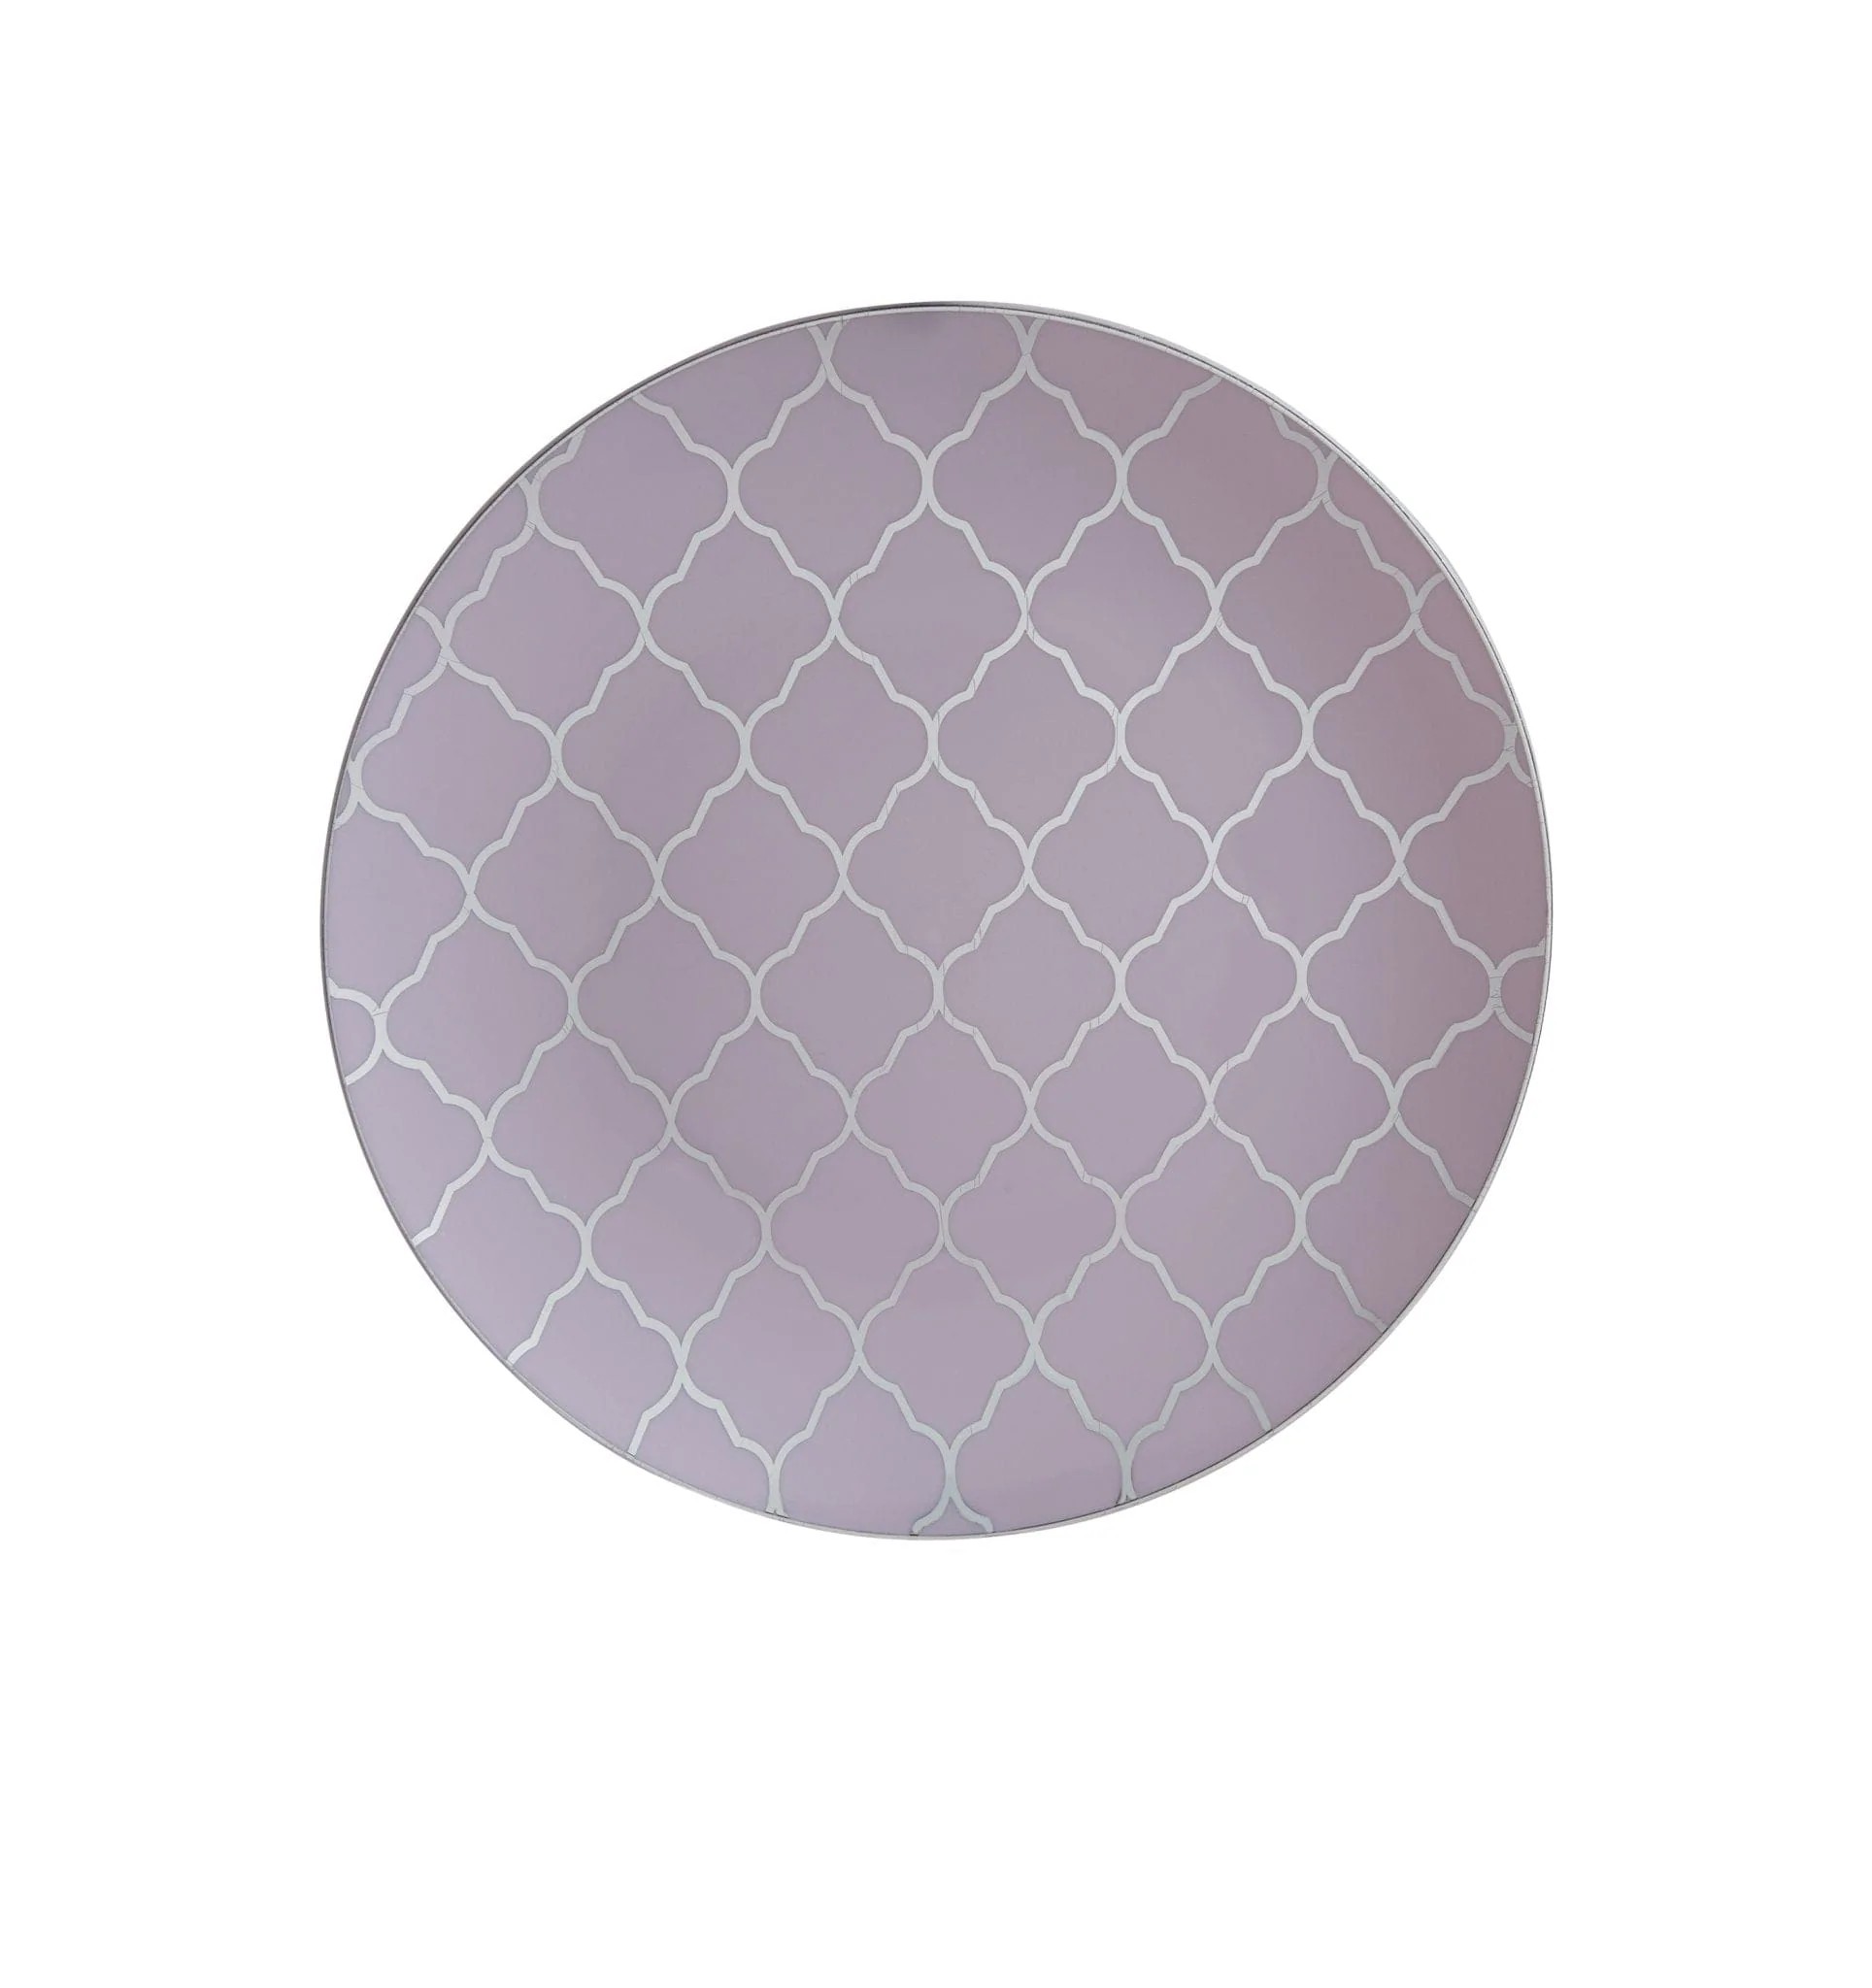 Luxe Party Lavender with Silver Lattice Pattern Plastic Appetizer Plate 7.25